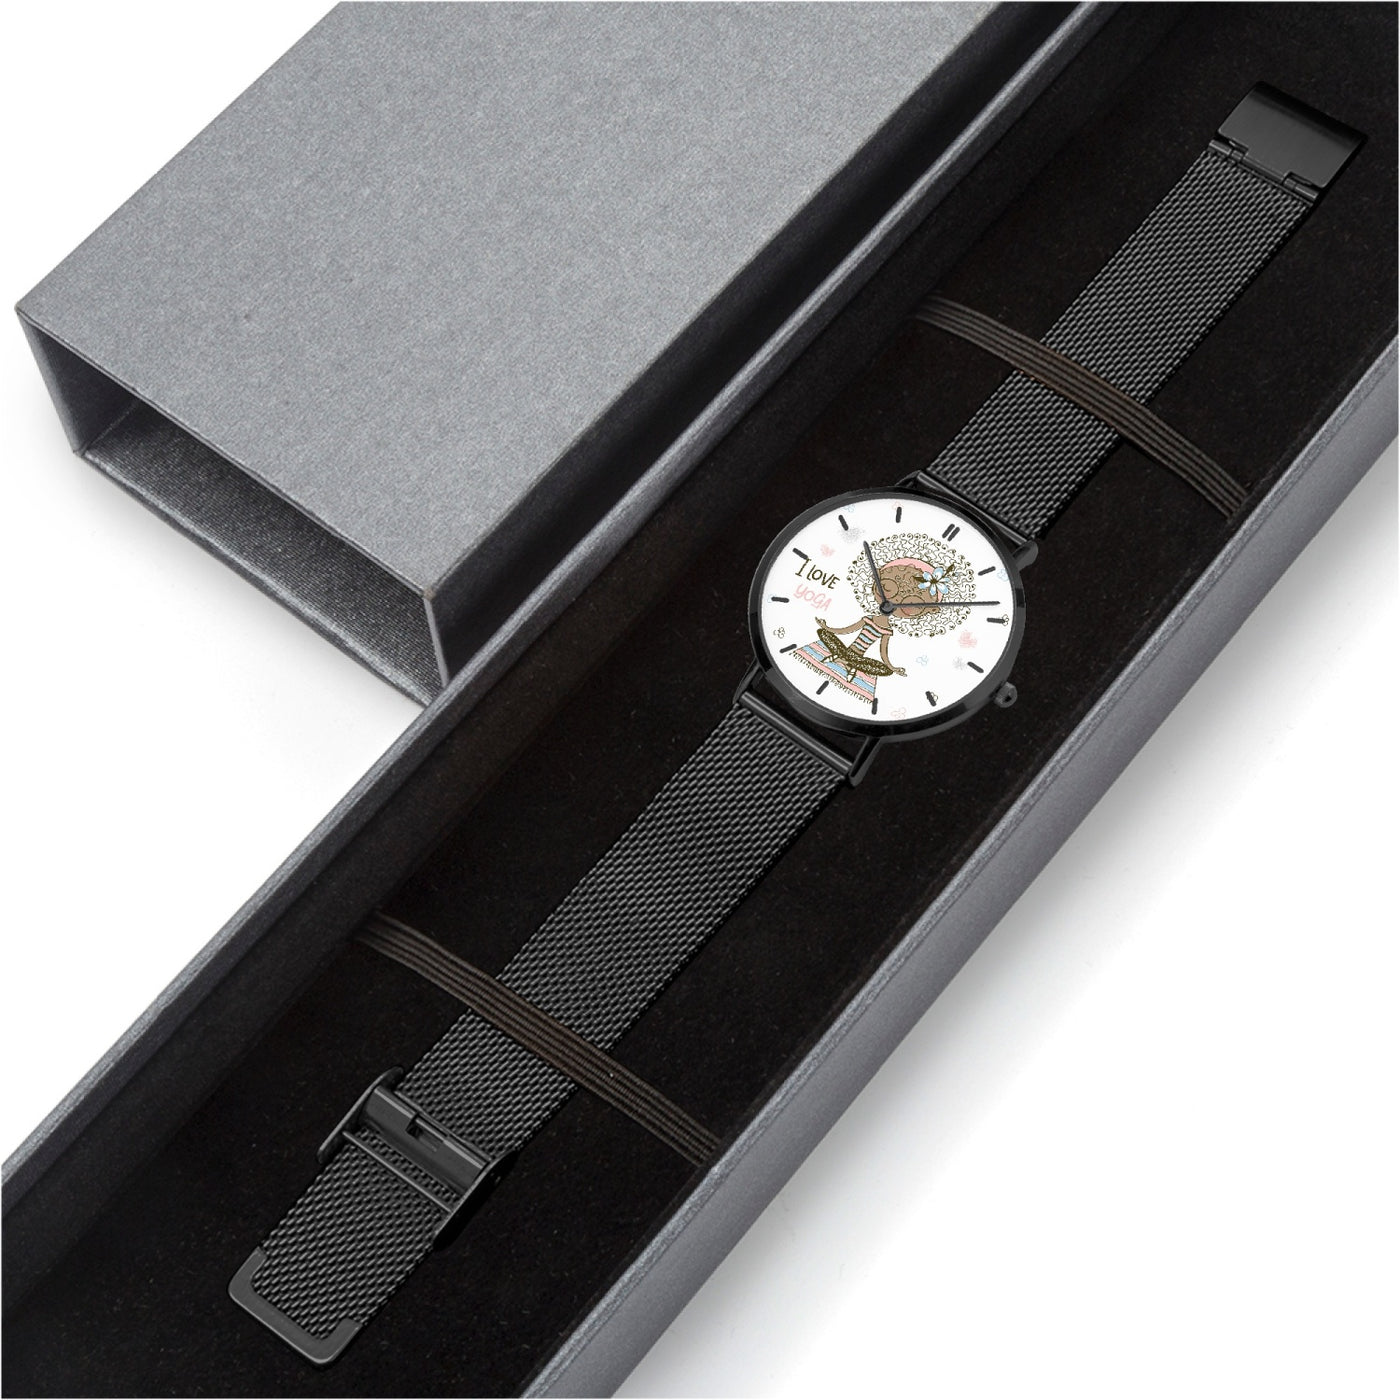 I Love Yoga - Fashion Ultra-thin Stainless Steel Quartz Watch (With Indicators)